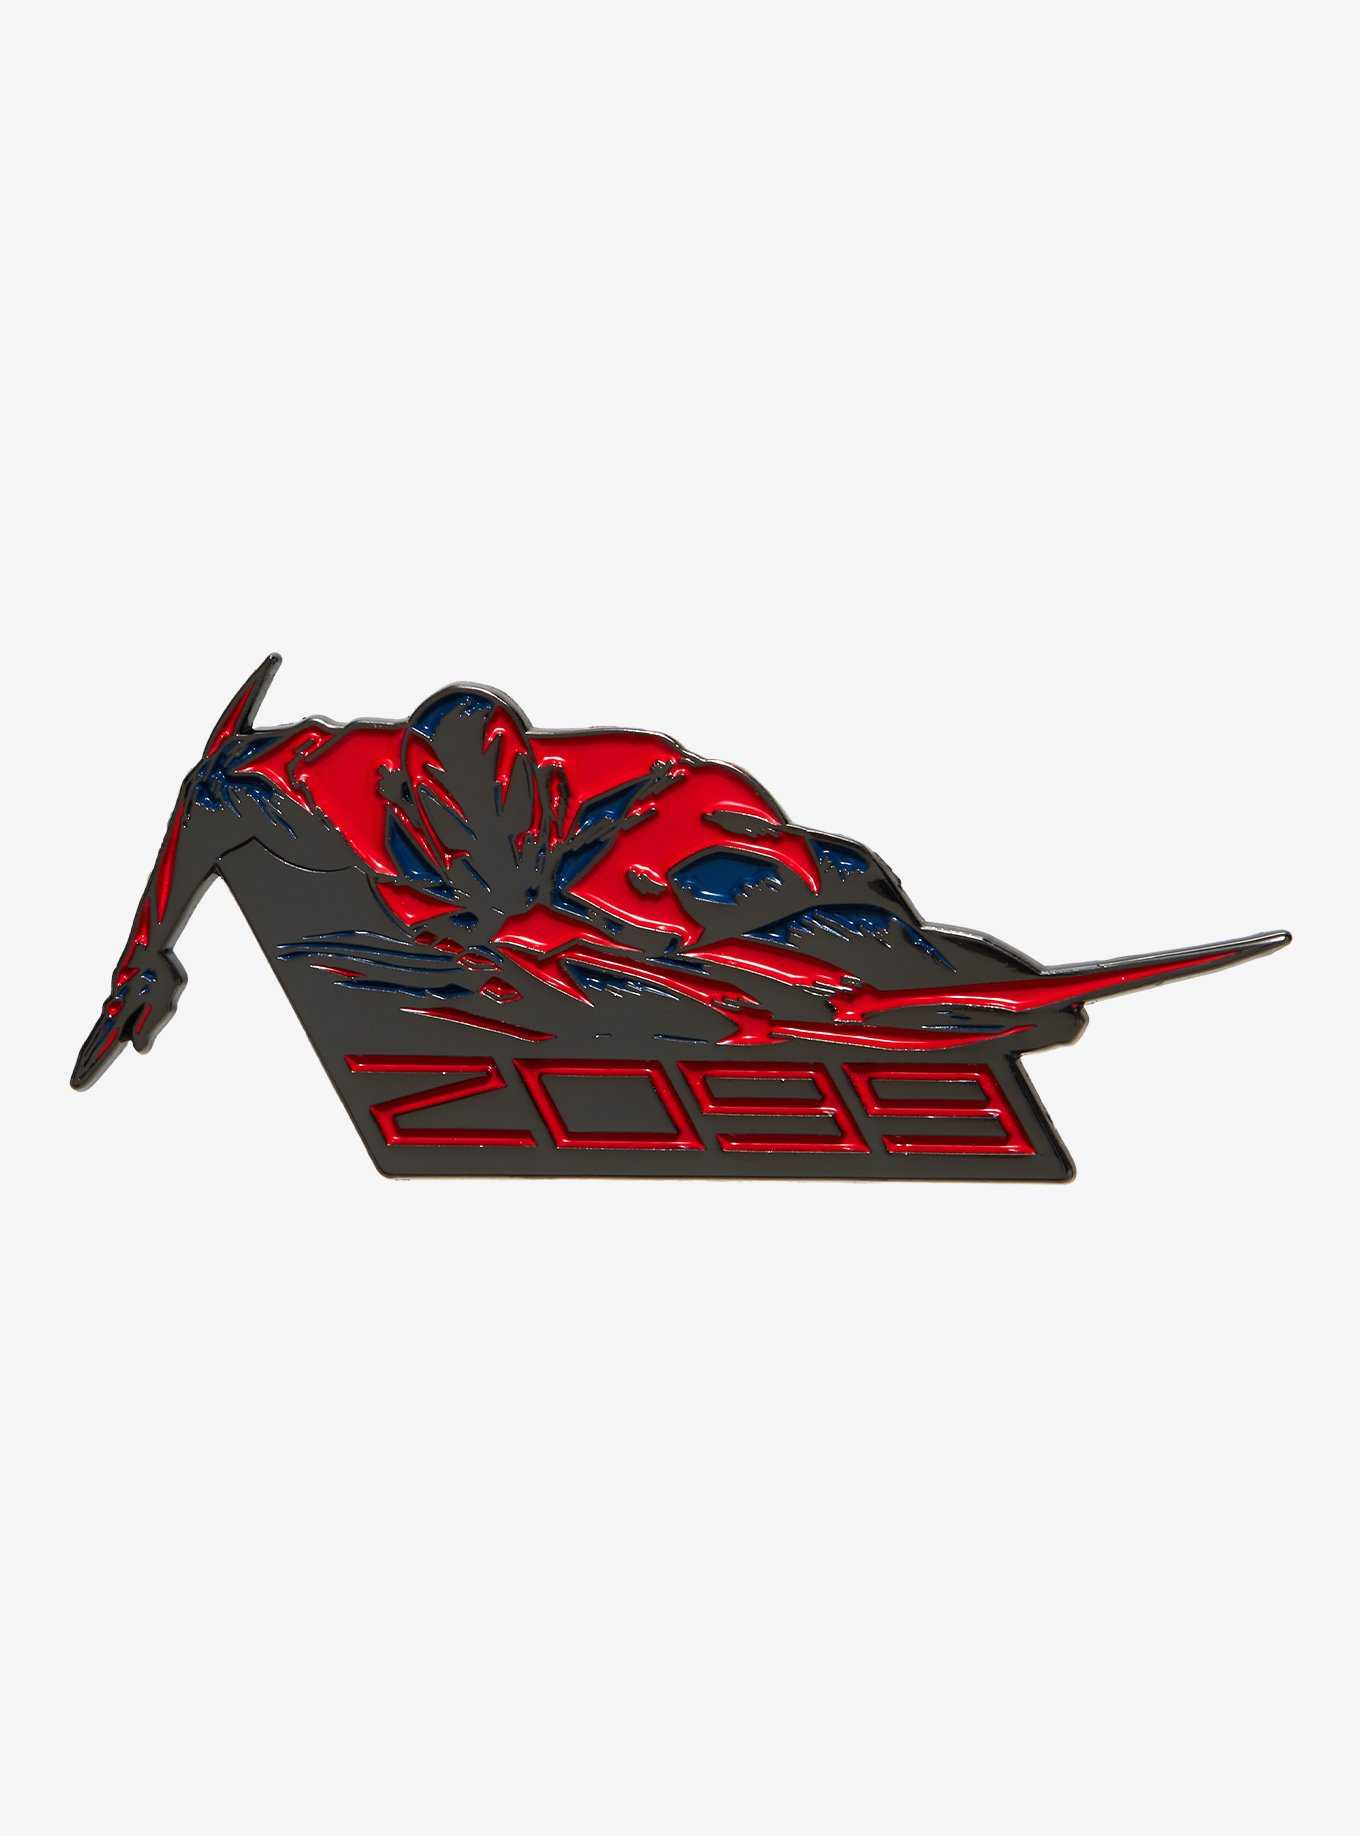 Marvel Spider-Man: Across the Spider-Verse Spider-Man 2099 Enamel Pin - BoxLunch Exclusive, , hi-res